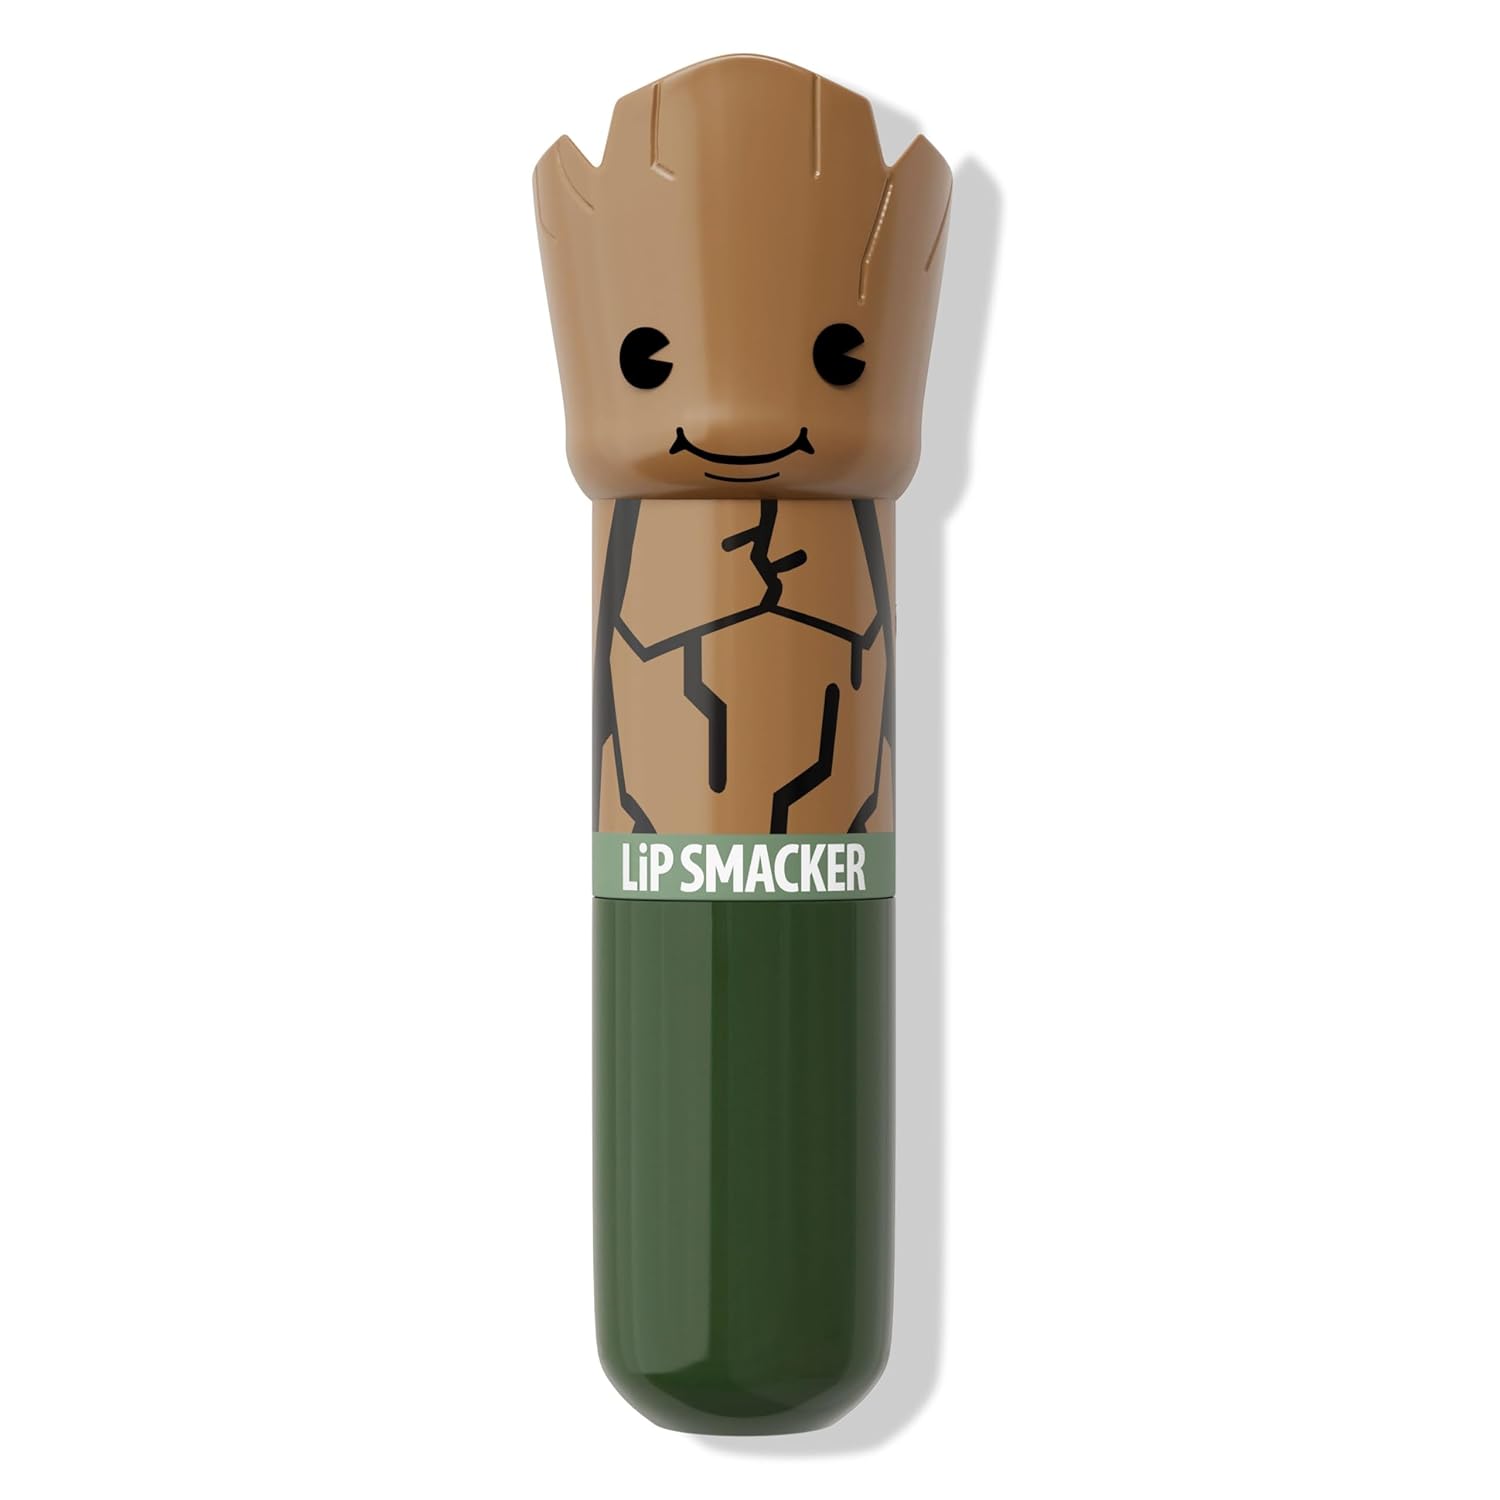 Lip Smacker Marvel, Guardians of the Galaxy, lippy pal, lip balm for kids - Groot